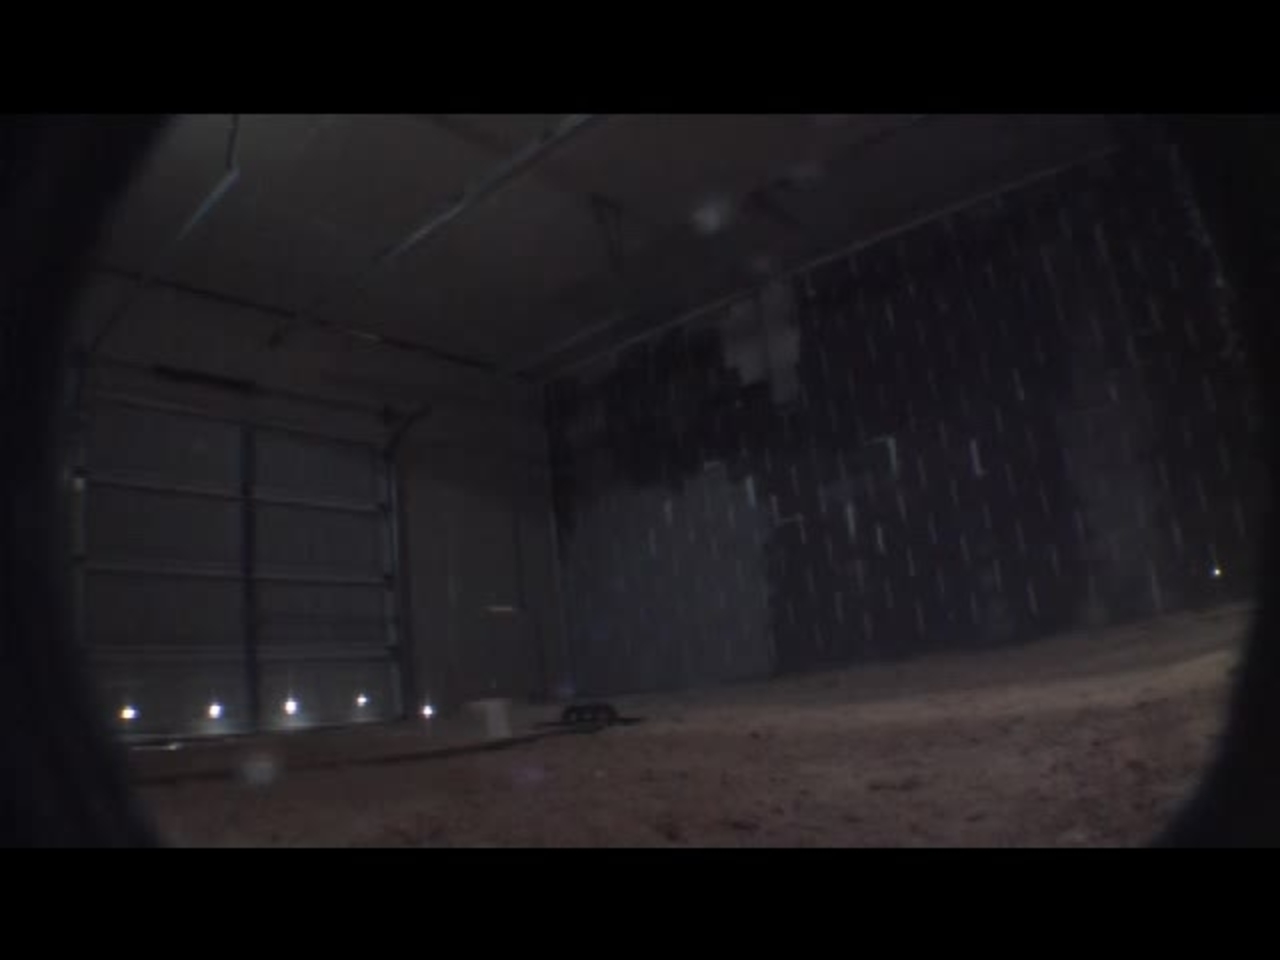 Test 2: Dispersion and Burning Behavior of Hydrogen Released in a Full-Scale Residential Garage in the Presence and Absence of Conventional Automobiles (View of garage interior from floor camera)